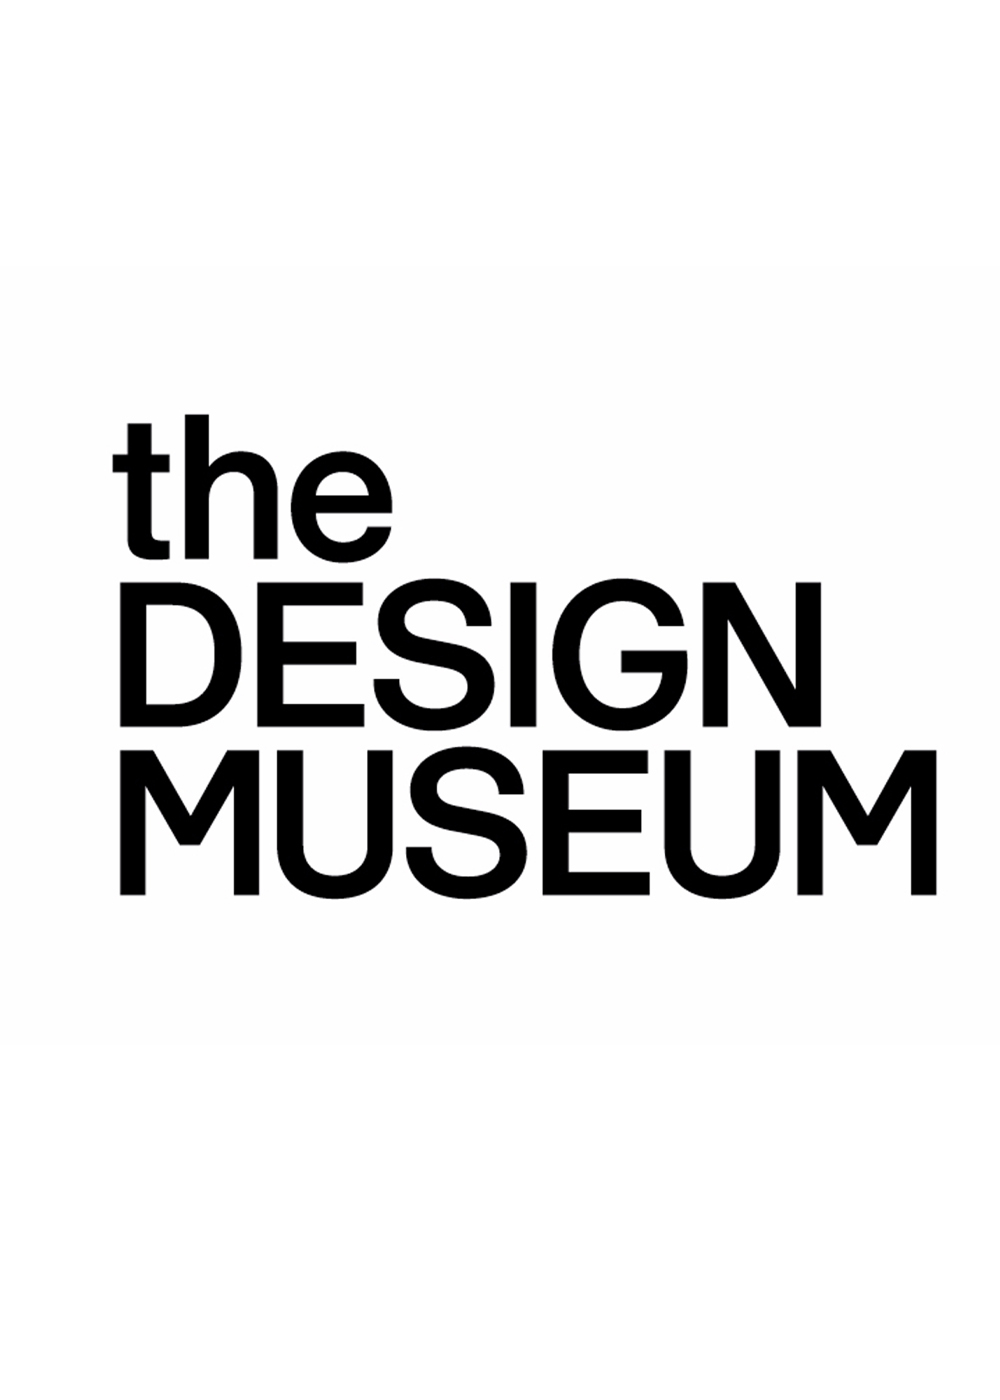 Museum of design at Italy